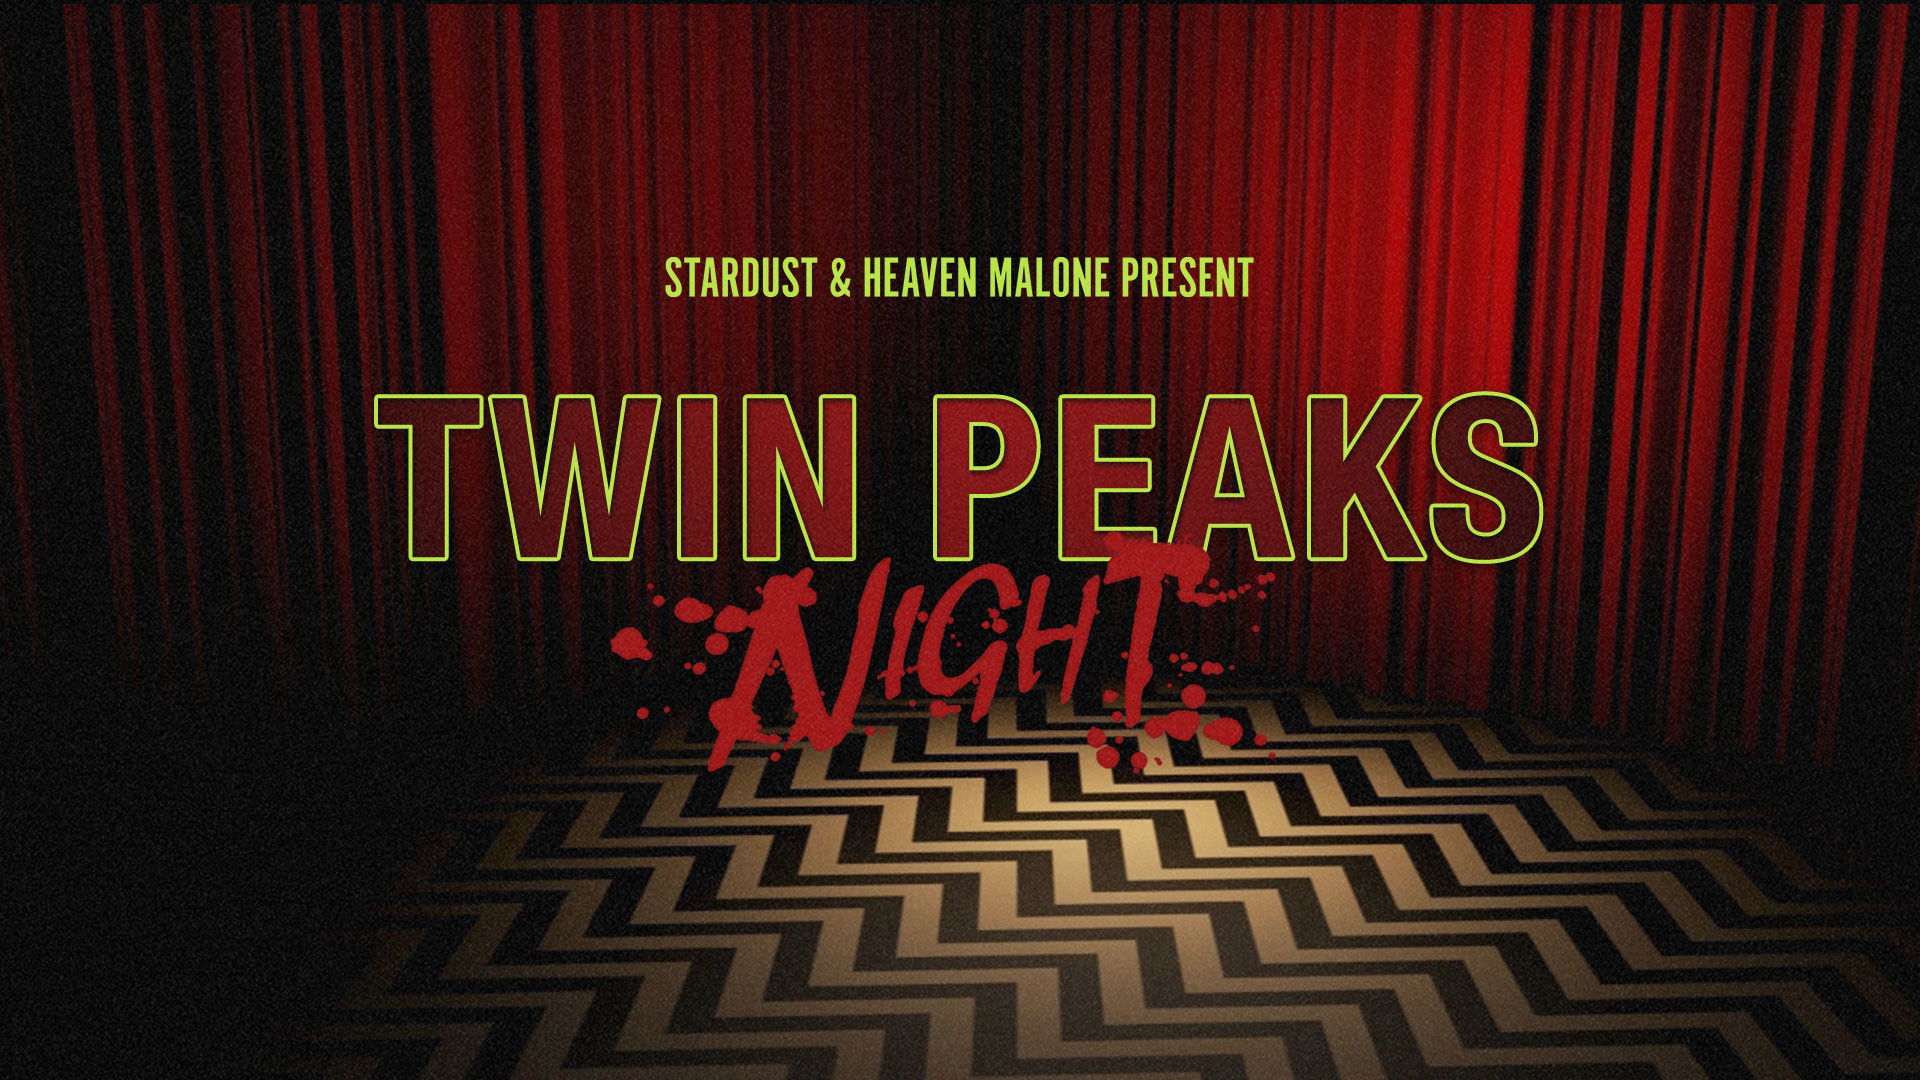 1920x1080 Twin Peaks Night - Drag & Burlesque Dance Party - June 1, 2017 at Berlin  Nightclub, Chicago - DJ sets by Heaven Malone